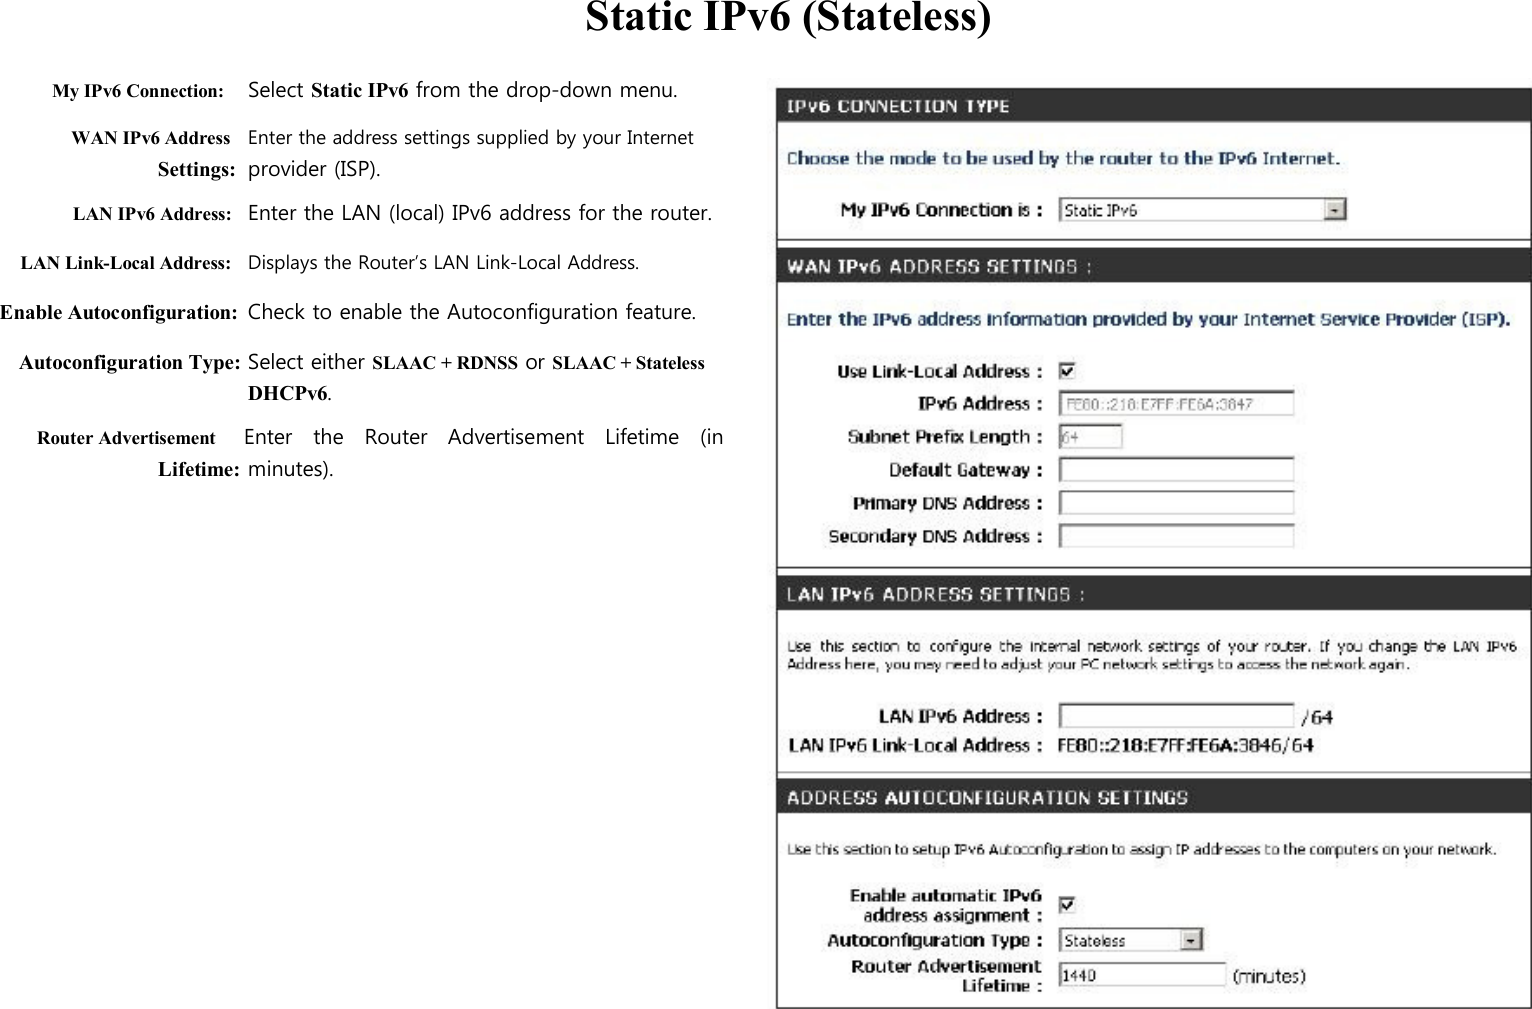  Static IPv6 (Stateless)  My IPv6 Connection: Select Static IPv6 from the drop-down menu.   WAN IPv6 Address Enter the address settings supplied by your Internet Settings: provider (ISP). LAN IPv6 Address: Enter the LAN (local) IPv6 address for the router. LAN Link-Local Address: Displays the Router’s LAN Link-Local Address. Enable Autoconfiguration: Check to enable the Autoconfiguration feature. Autoconfiguration Type: Select either SLAAC + RDNSS or SLAAC + Stateless DHCPv6. Router Advertisement     Enter    the    Router    Advertisement    Lifetime    (in Lifetime: minutes).                                                                            